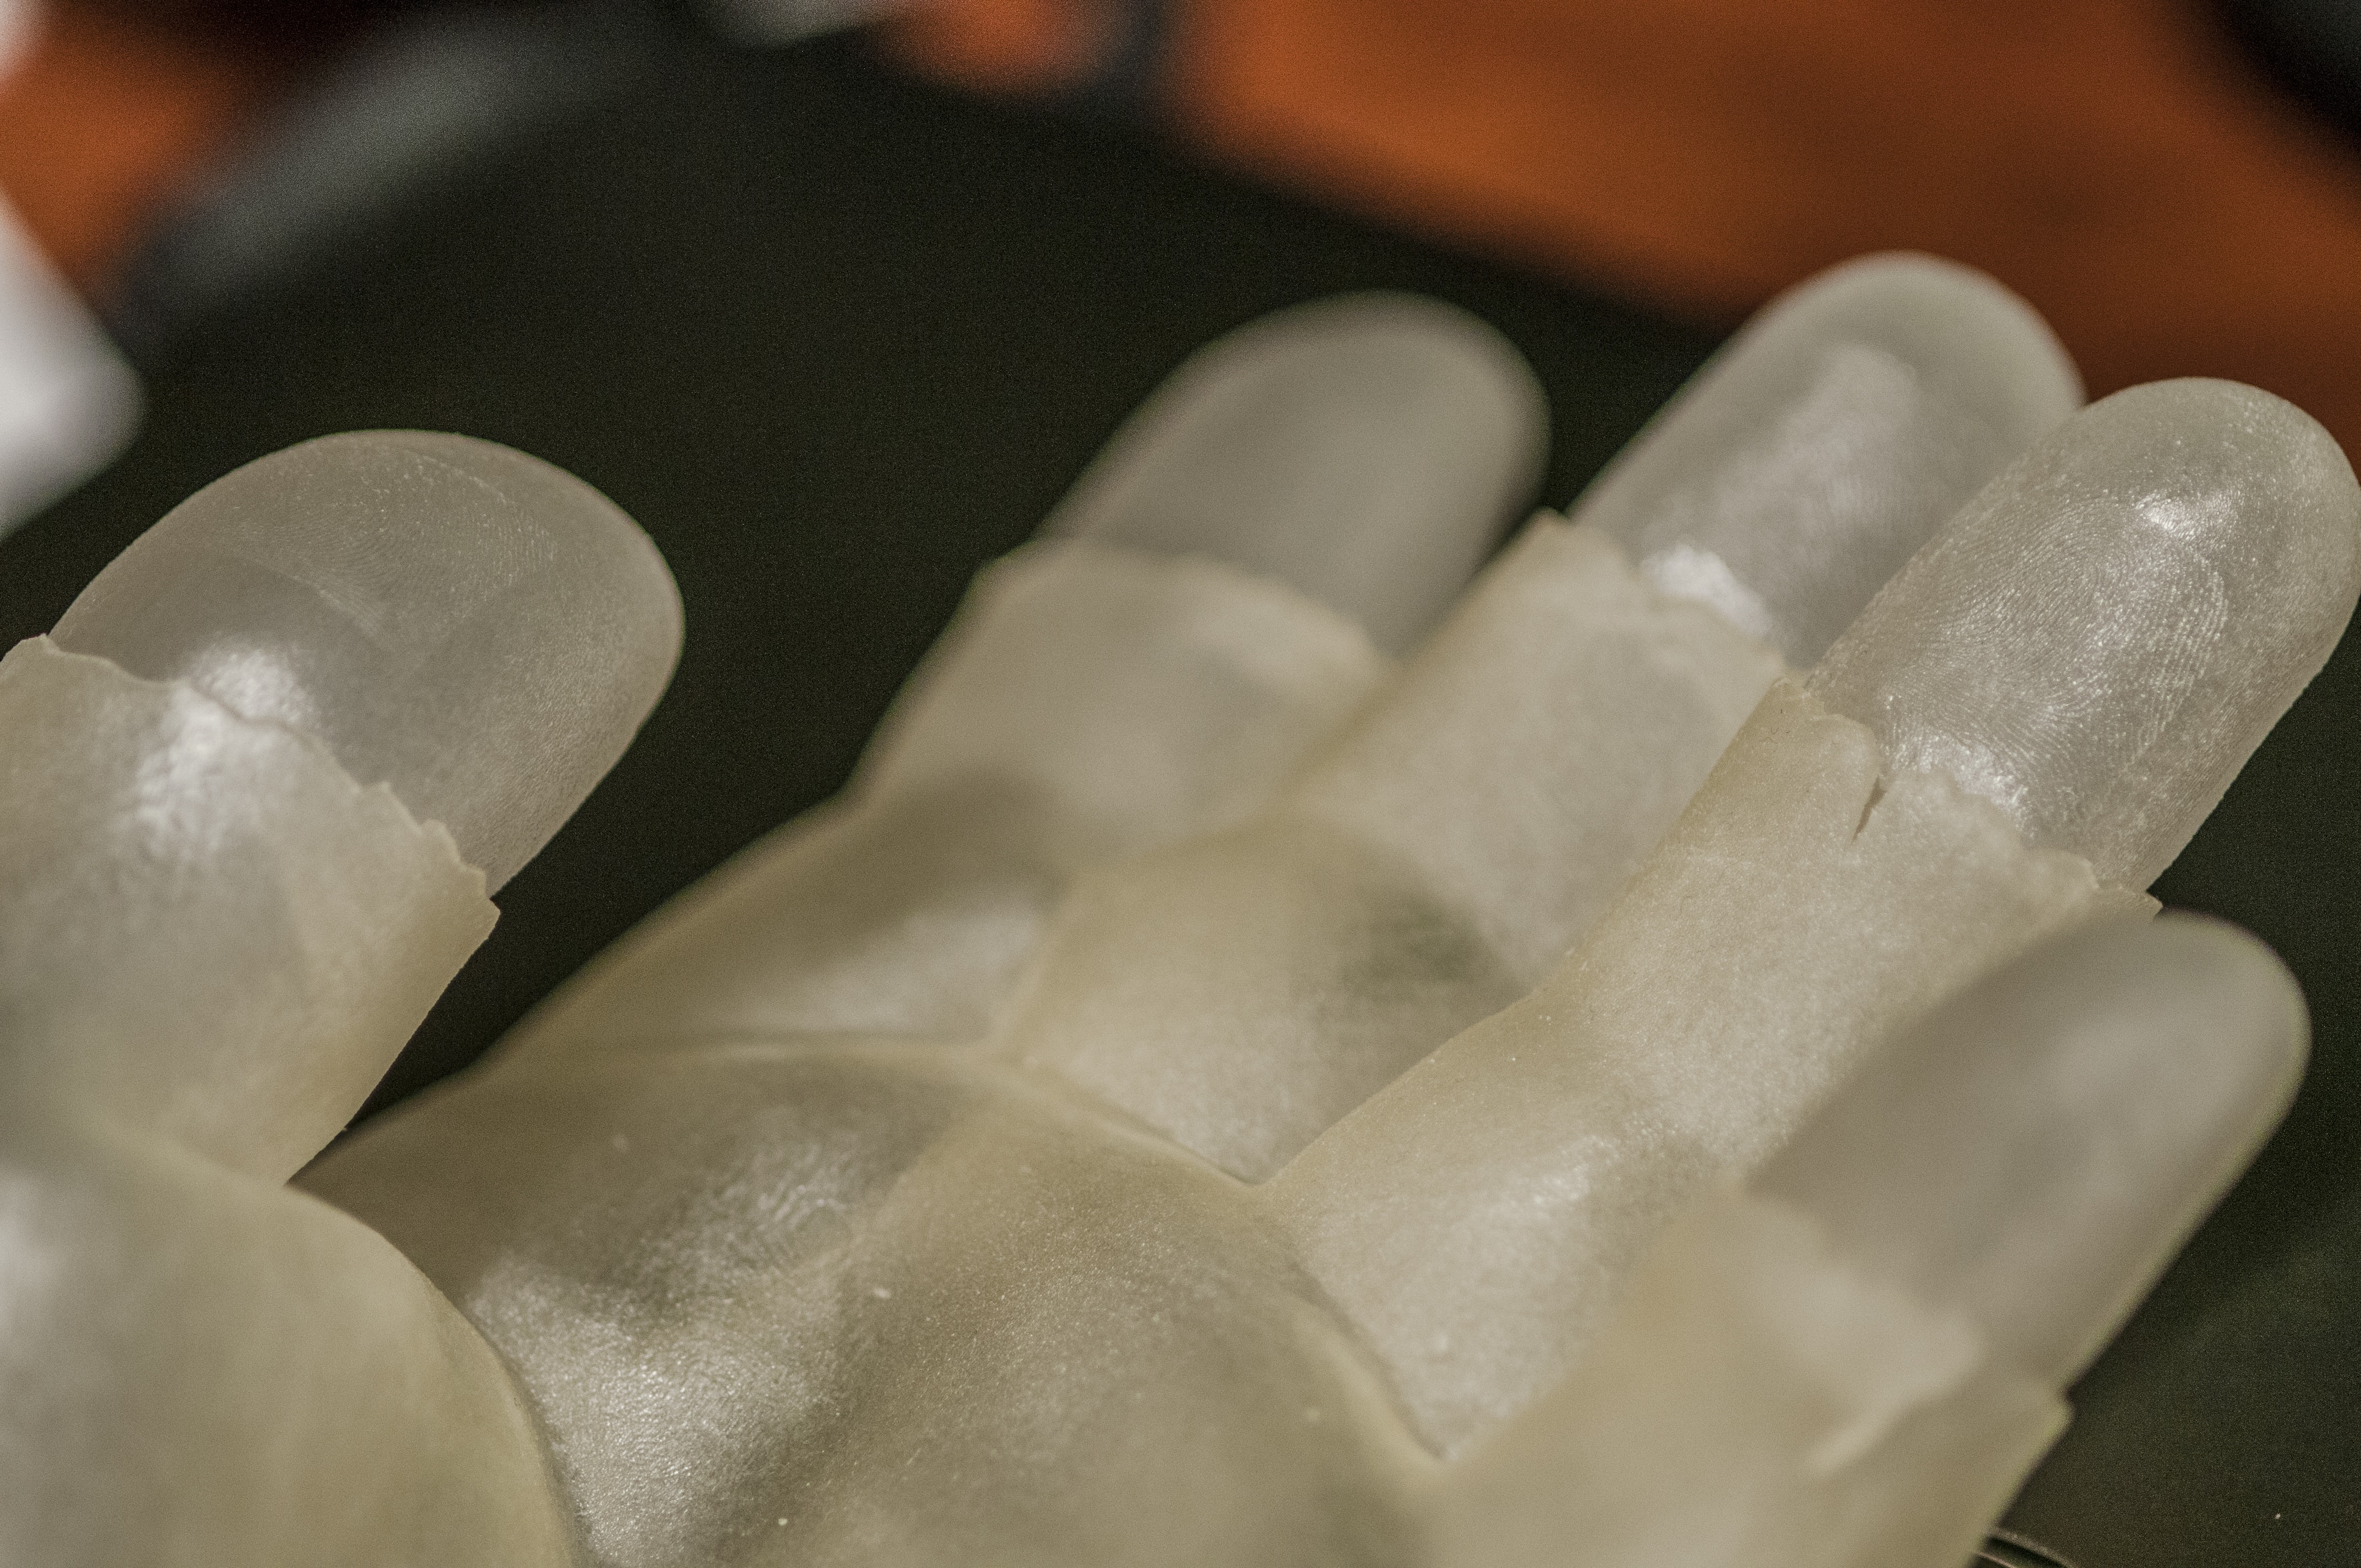 MSU researchers demonstrate how a 3-D printed model hand is used to test a fingerprint scanner for accuracy. Credit: G.L. Kohuth